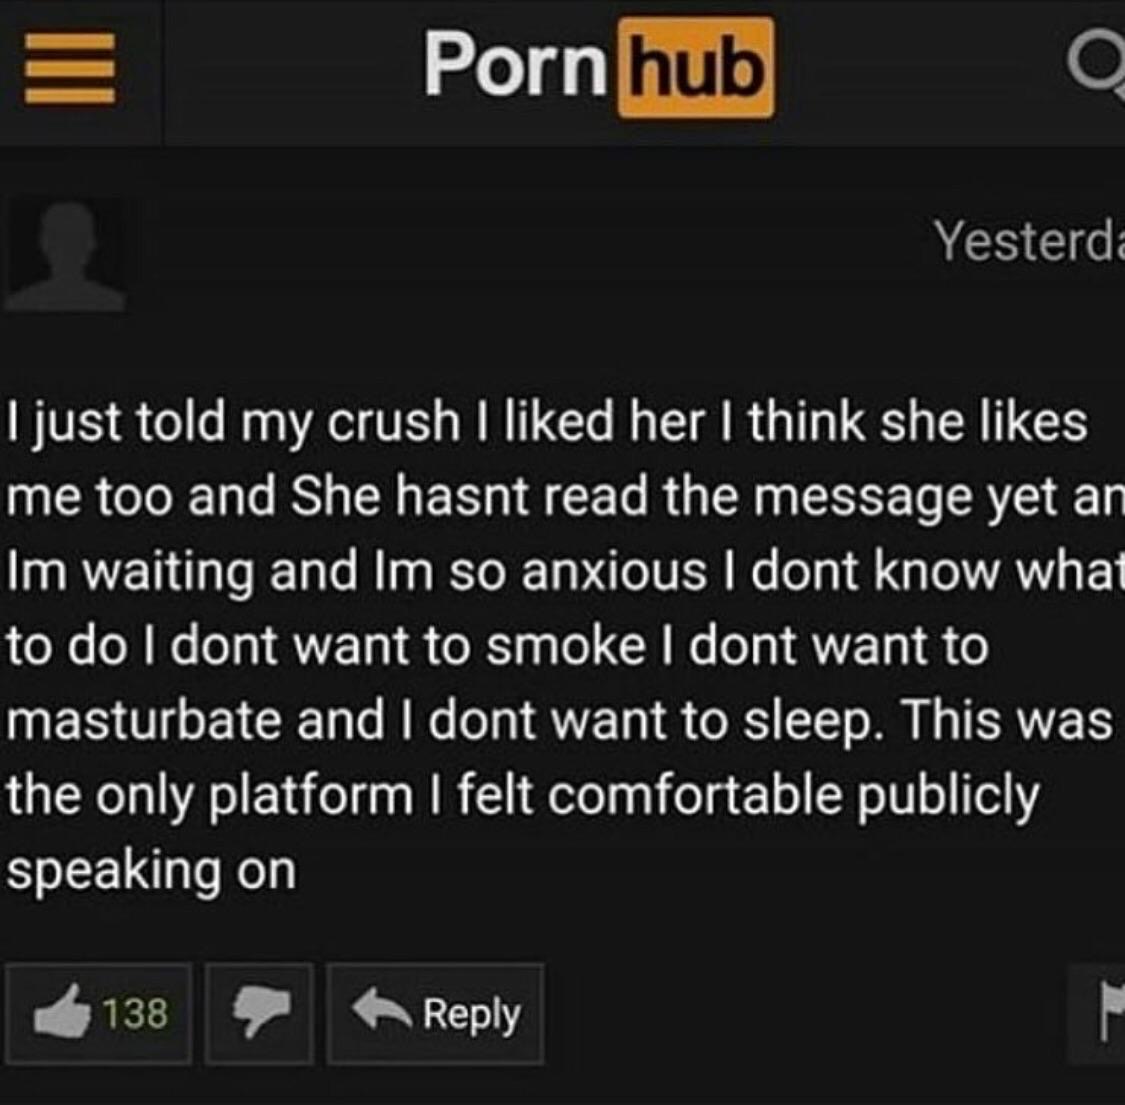 pornhub for kids - Porn hub Yesterda Tjust told my crush I d her I think she me too and She hasnt read the message yet an Im waiting and Im so anxious I dont know what to do I dont want to smoke I dont want to masturbate and I dont want to sleep. This was